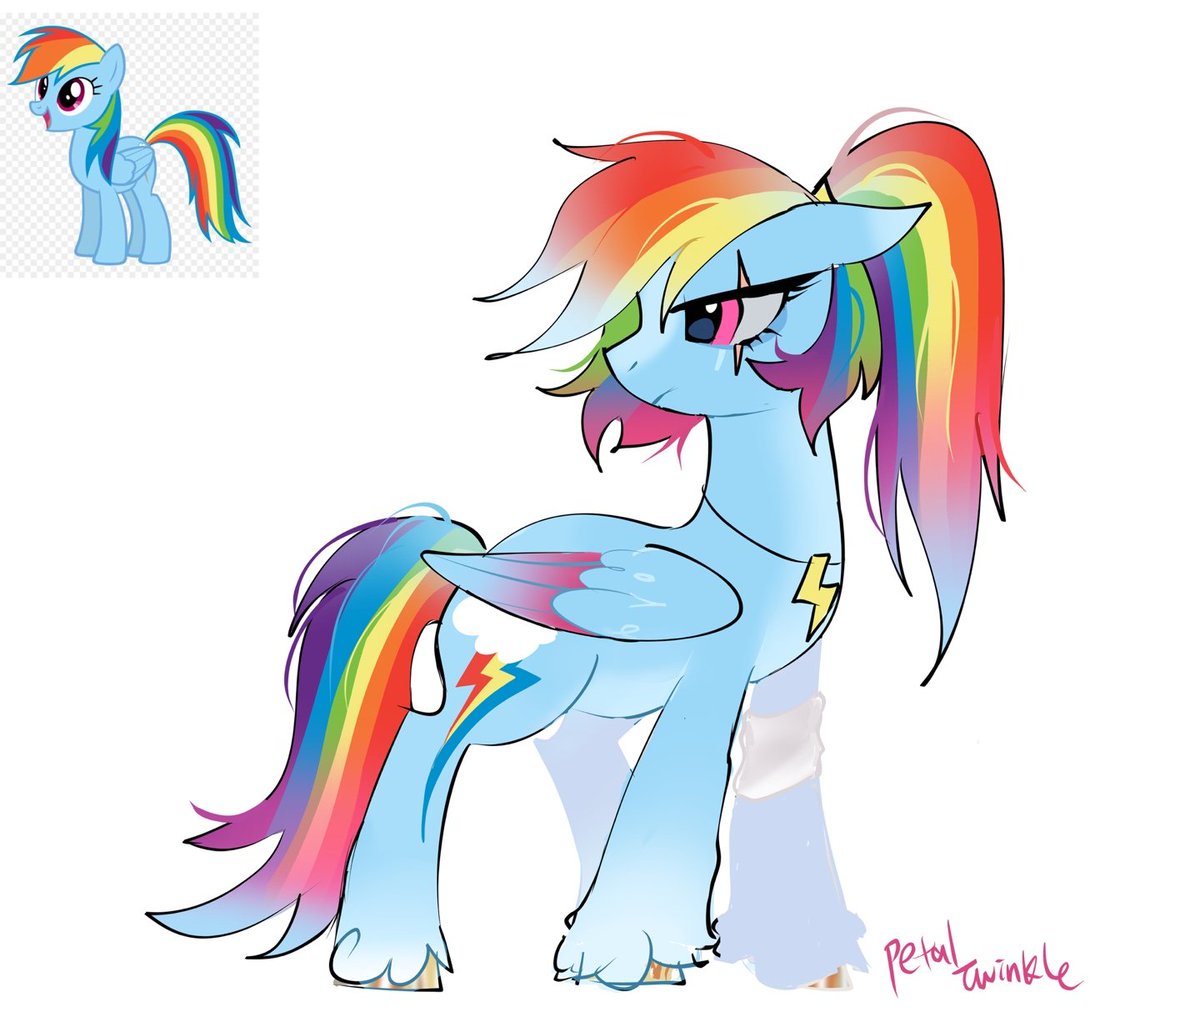 I don't draw rainbow often, so I drew her this time